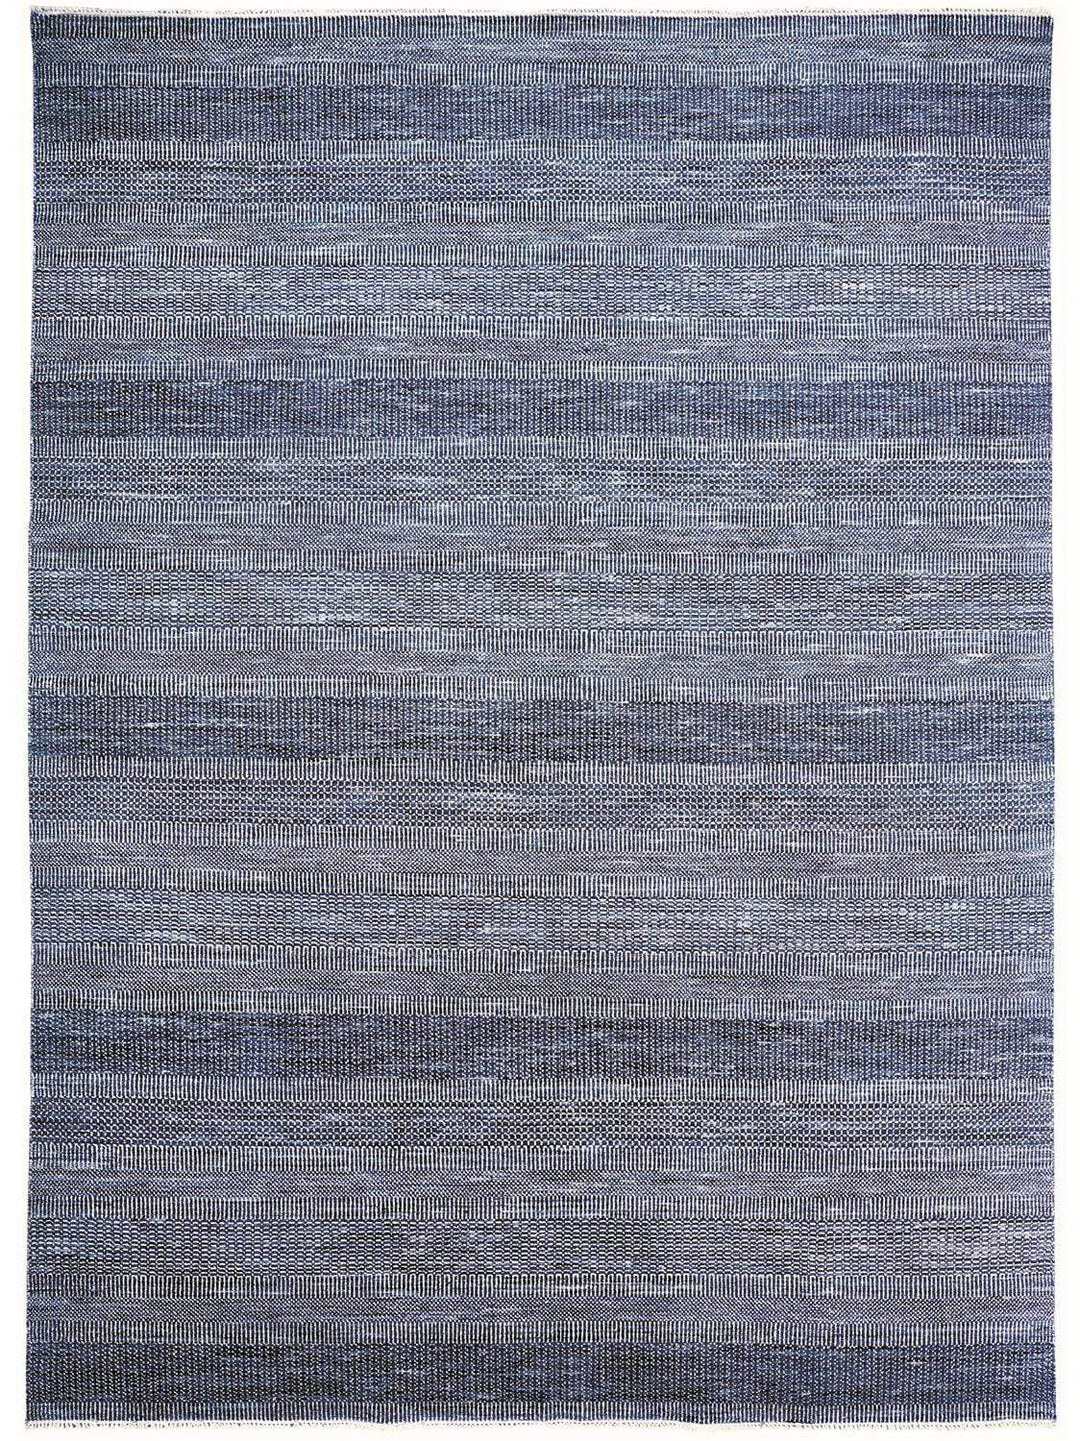 Feizy Feizy Janson Classic Striped Rug - Navy Blue & Silver Gray - Available in 8 Sizes 5'-6" x 8'-6" I92I6062NVYSLVE50